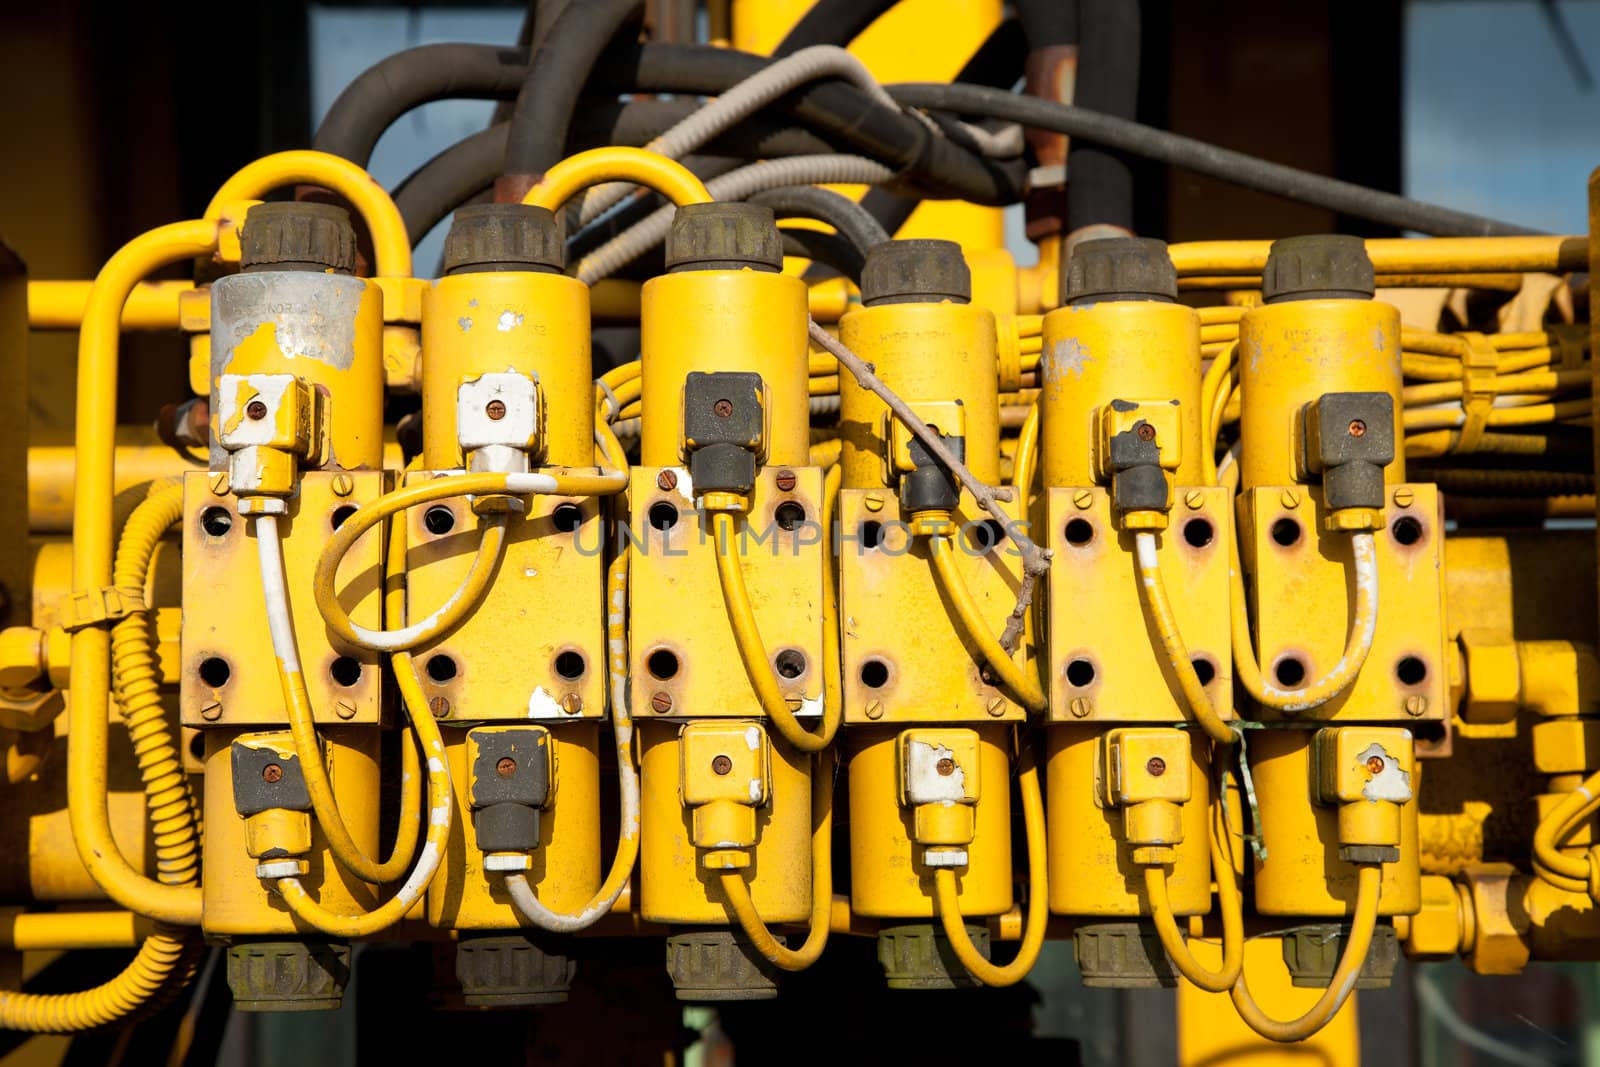 A unit with yellow plastic power connectors with wires and hoses.